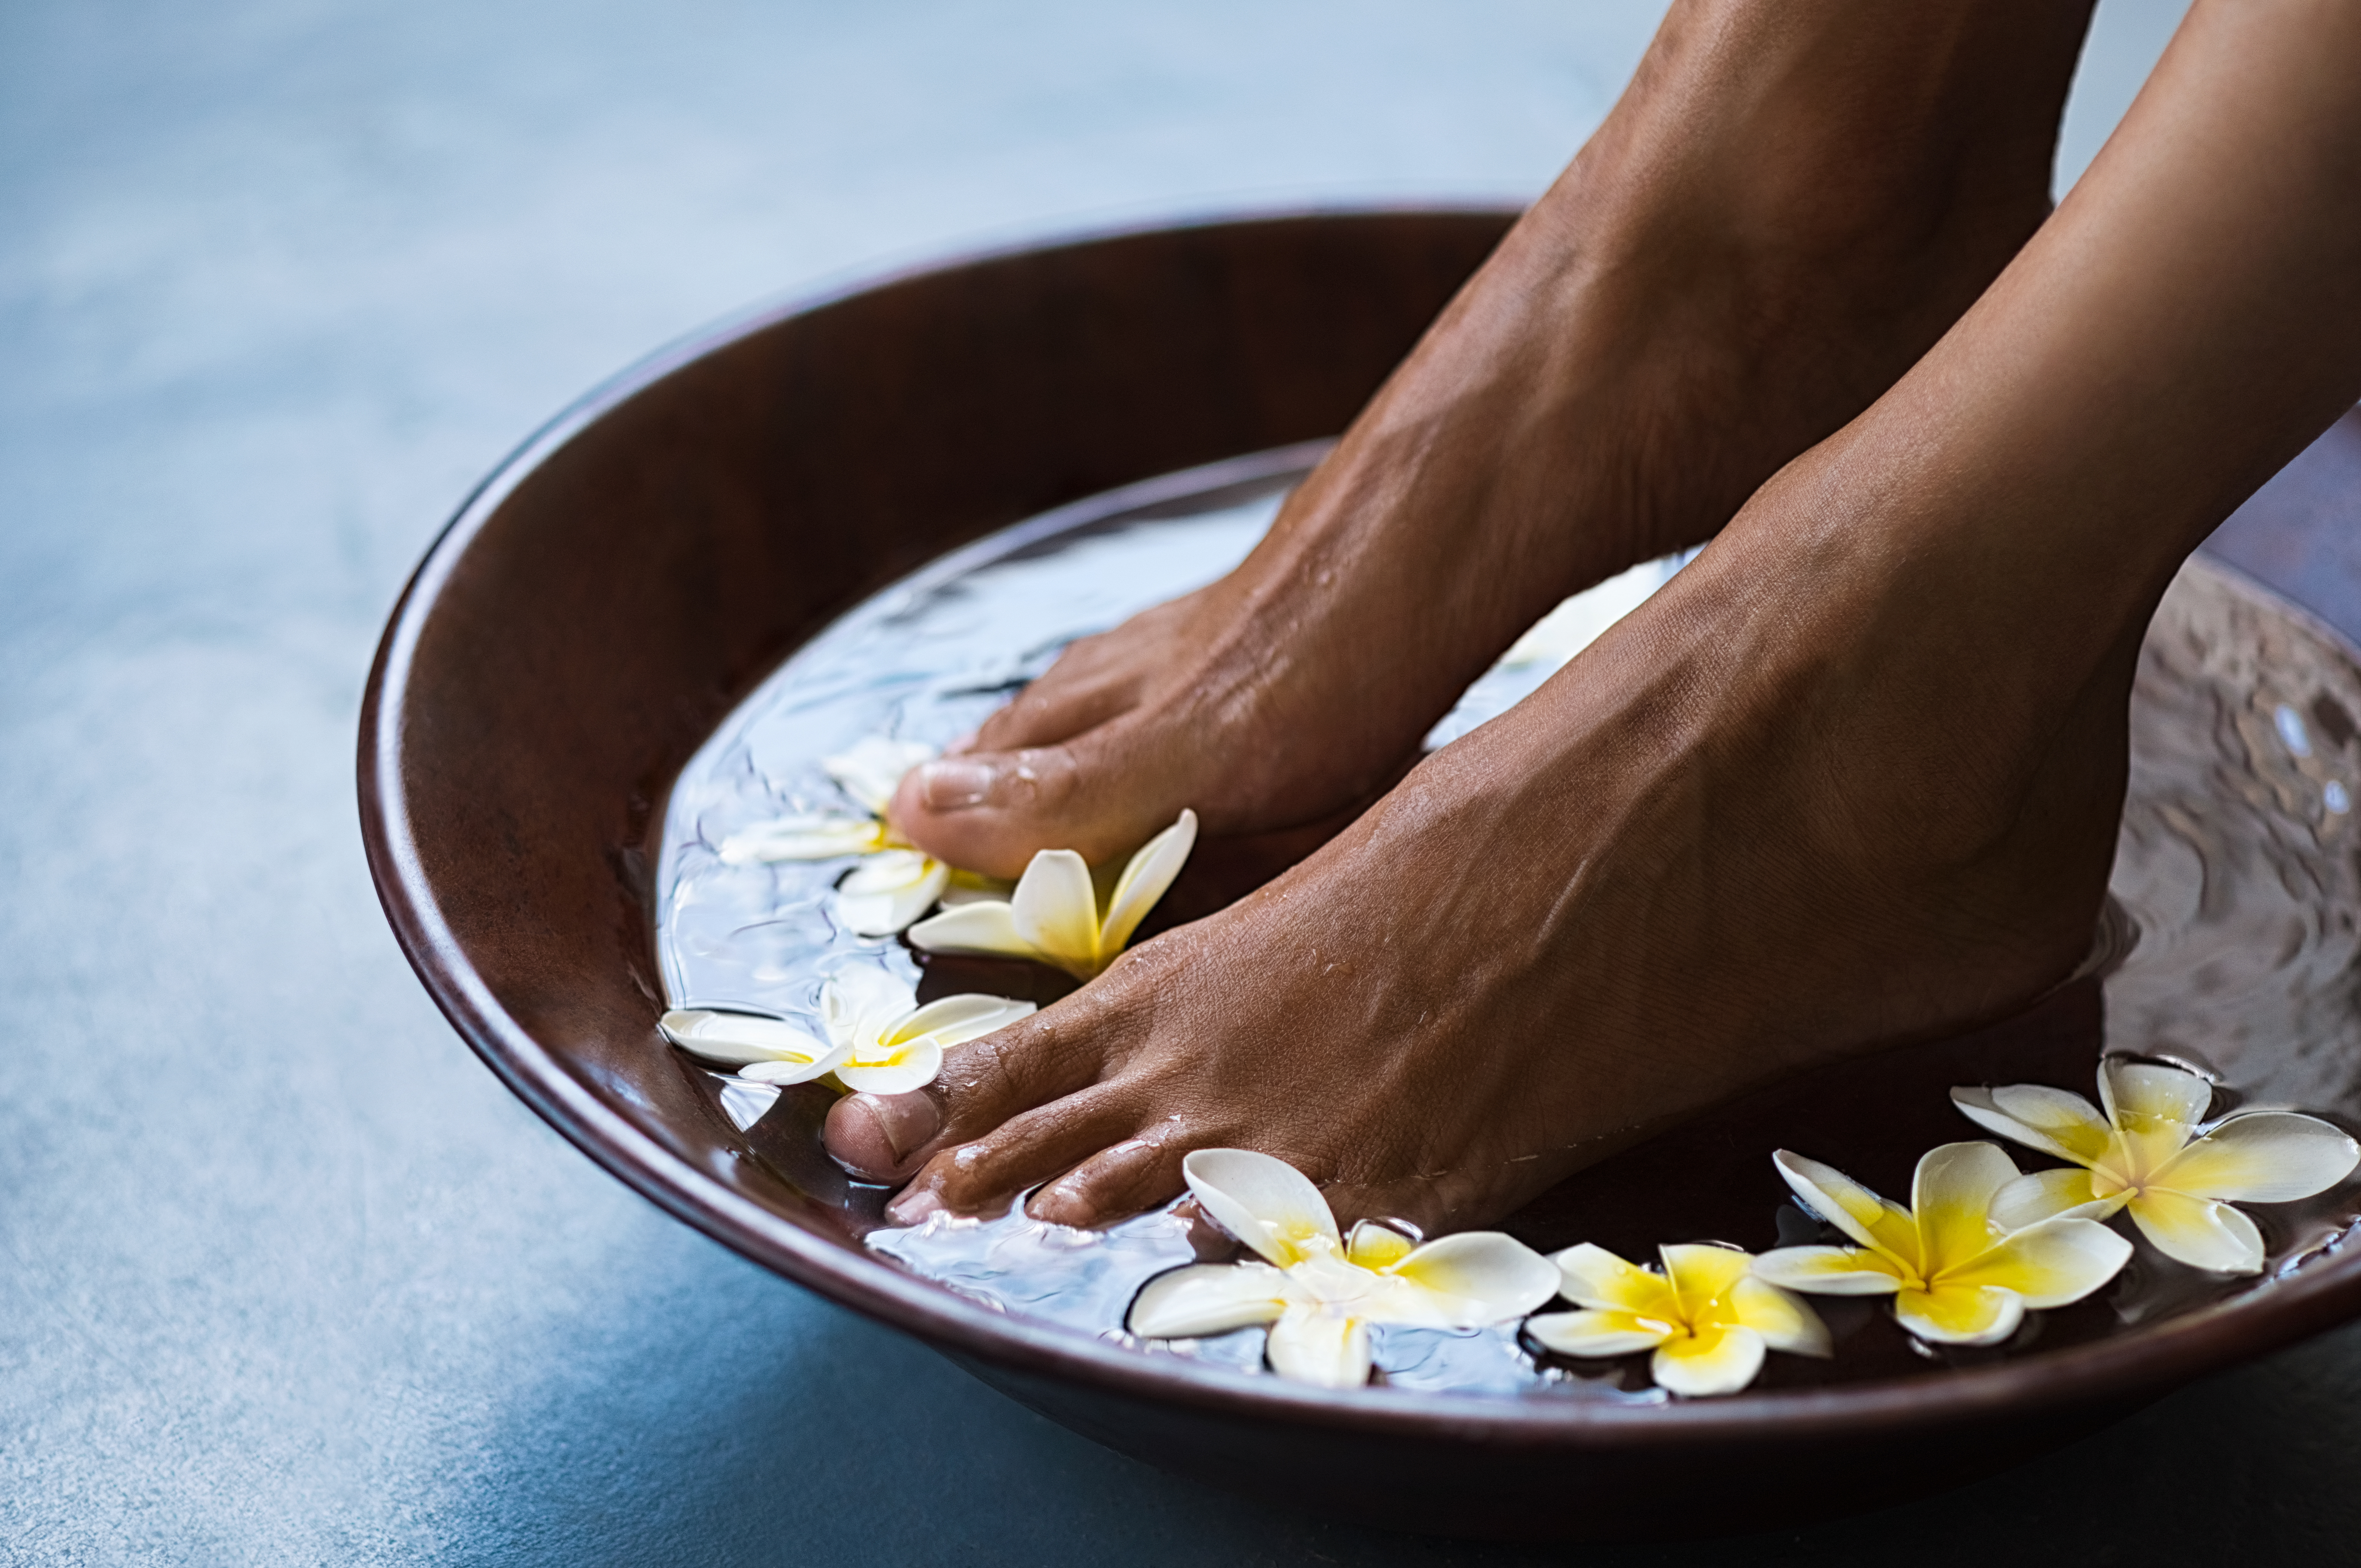 Aromatherapy Foot Deluxe with Finish - Ciao Bella Salon and Spa, Islamorada, Florida Keys - Foot Treatment - Foot Care - Foot Spa